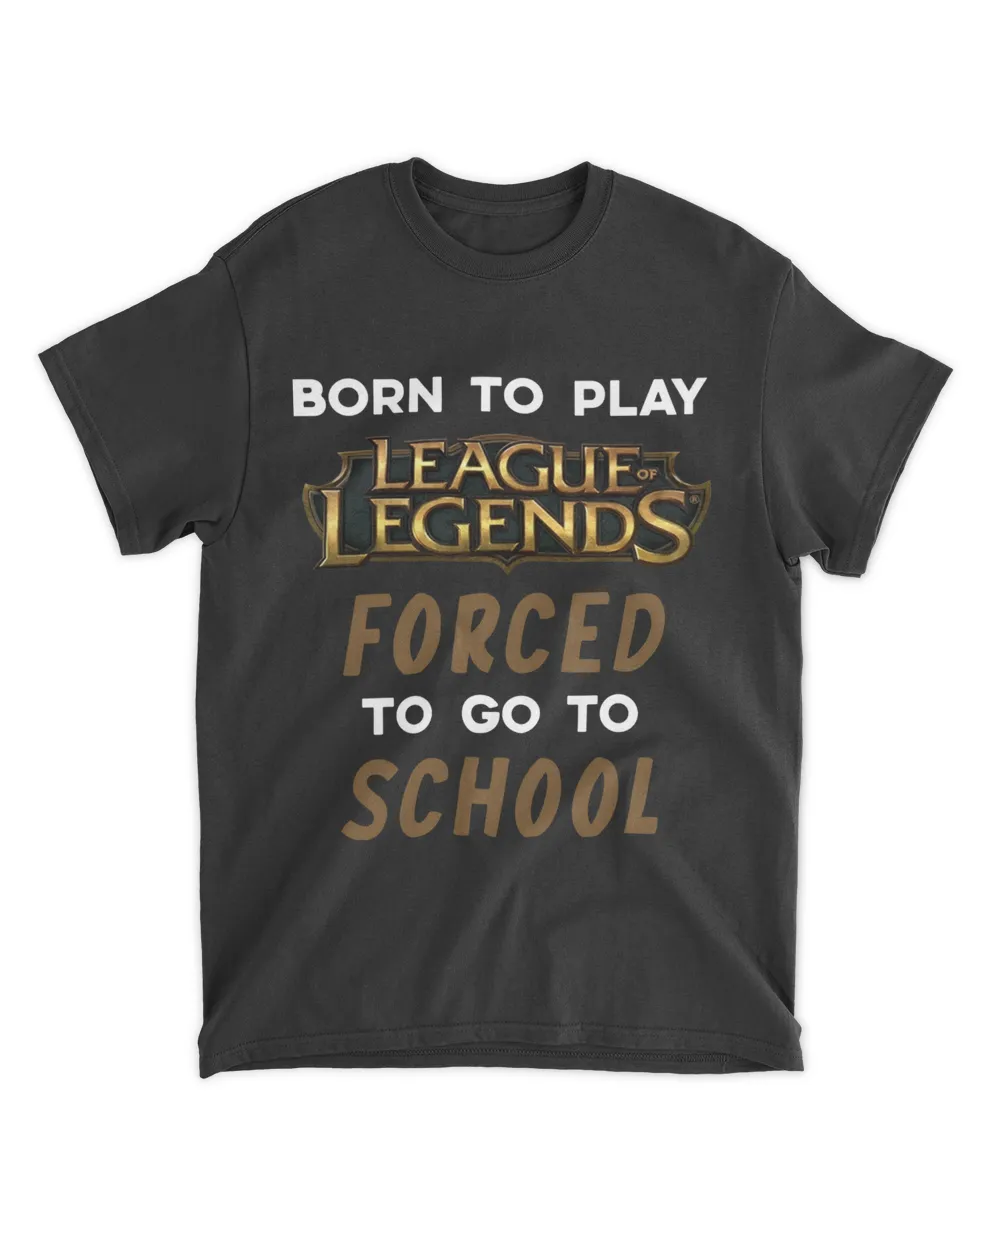 Born to play league of legends forced to go to school 9tore born to play league of legends forced to go to school shirt 2022 official design